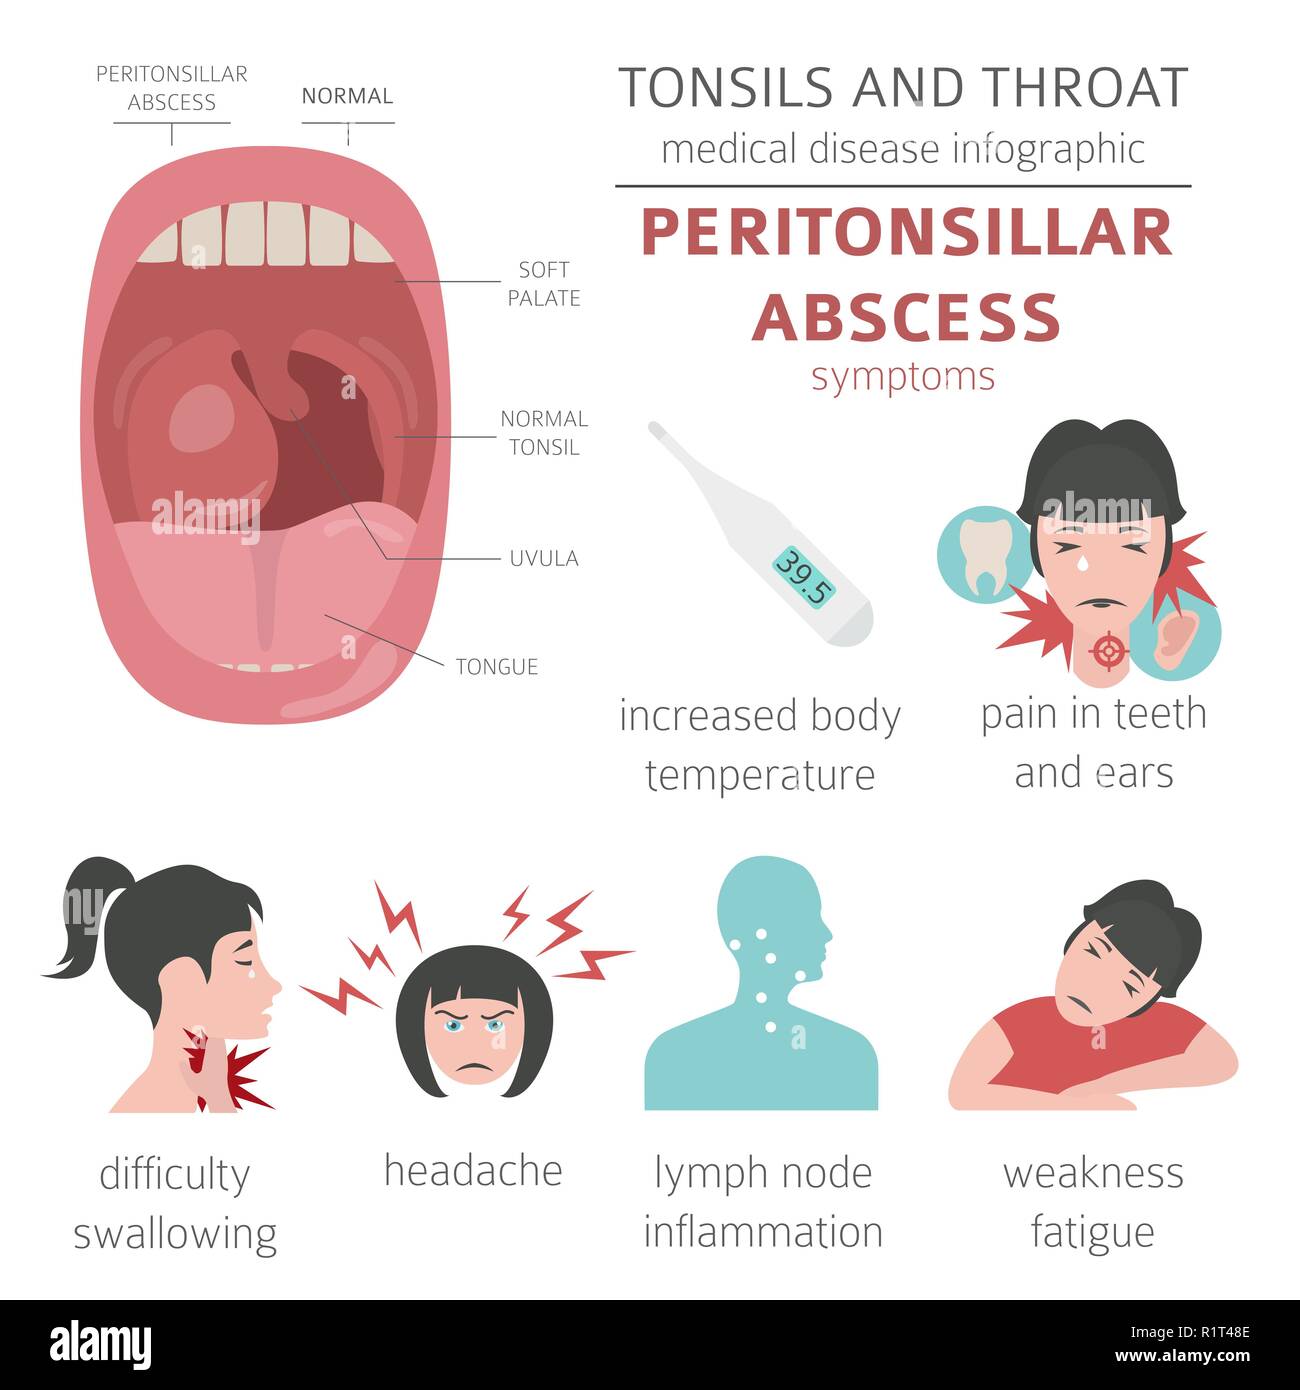 Tonsils and throat diseases. Peritonsillar abscess symptoms, treatment icon set. Medical infographic design. Vector illustration Stock Vector